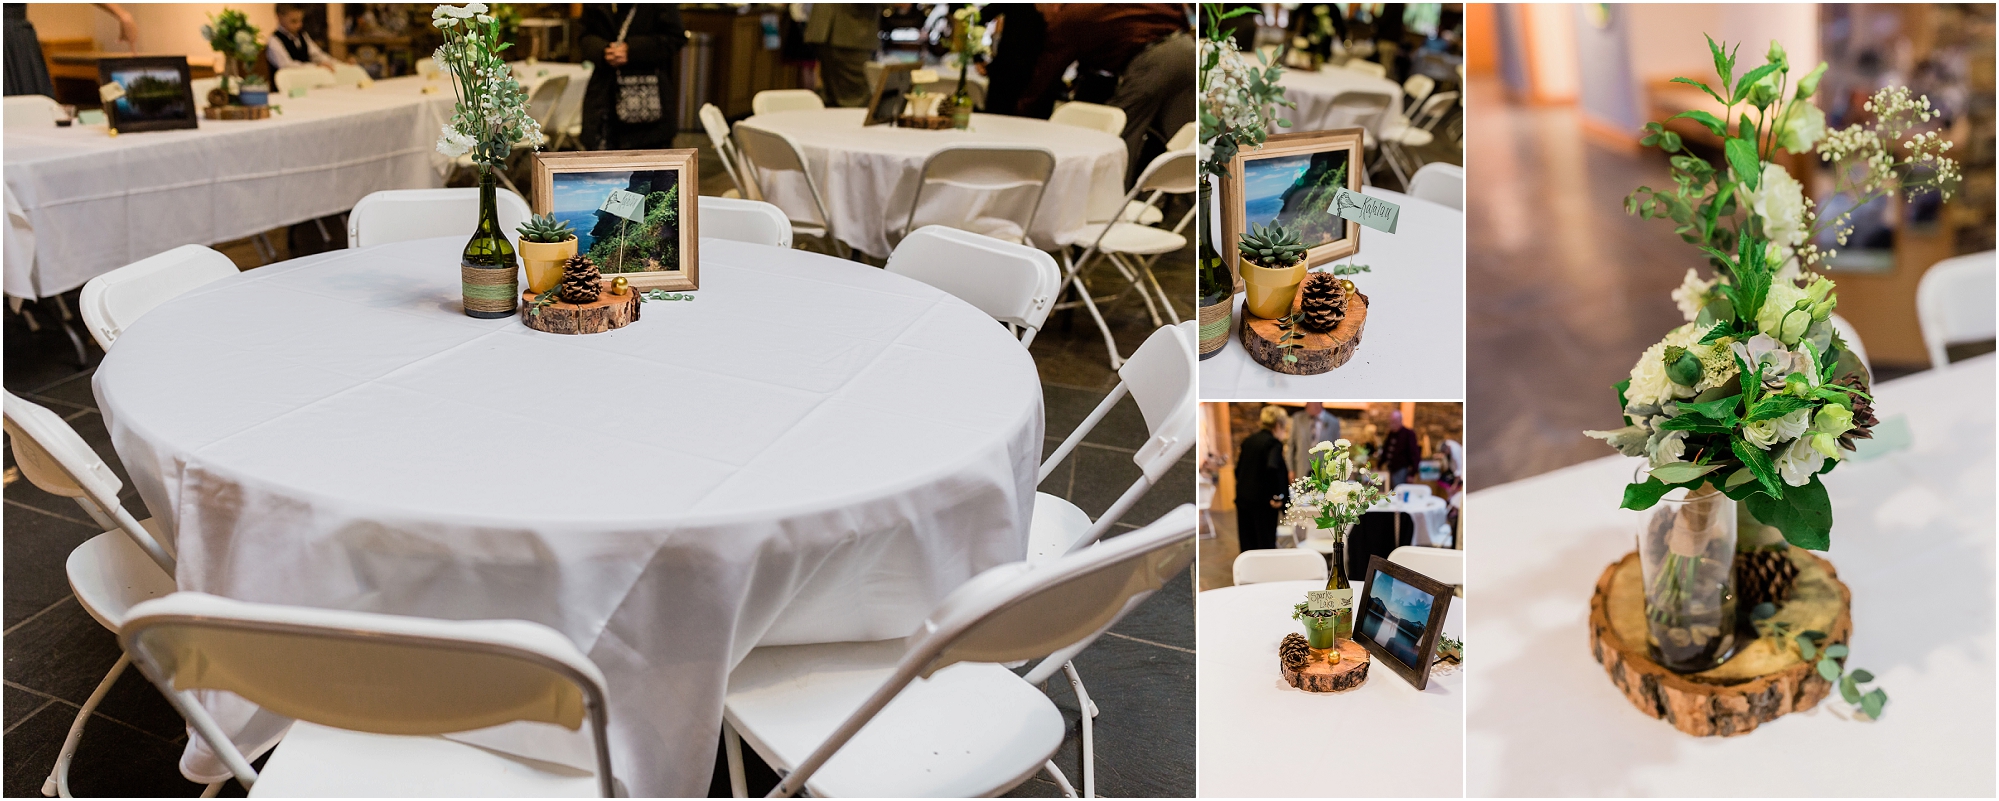 Seating arrangements for tables reflect local outdoor landmarks at this High Desert Museum wedding in Bend, OR. | Erica Swantek Photography